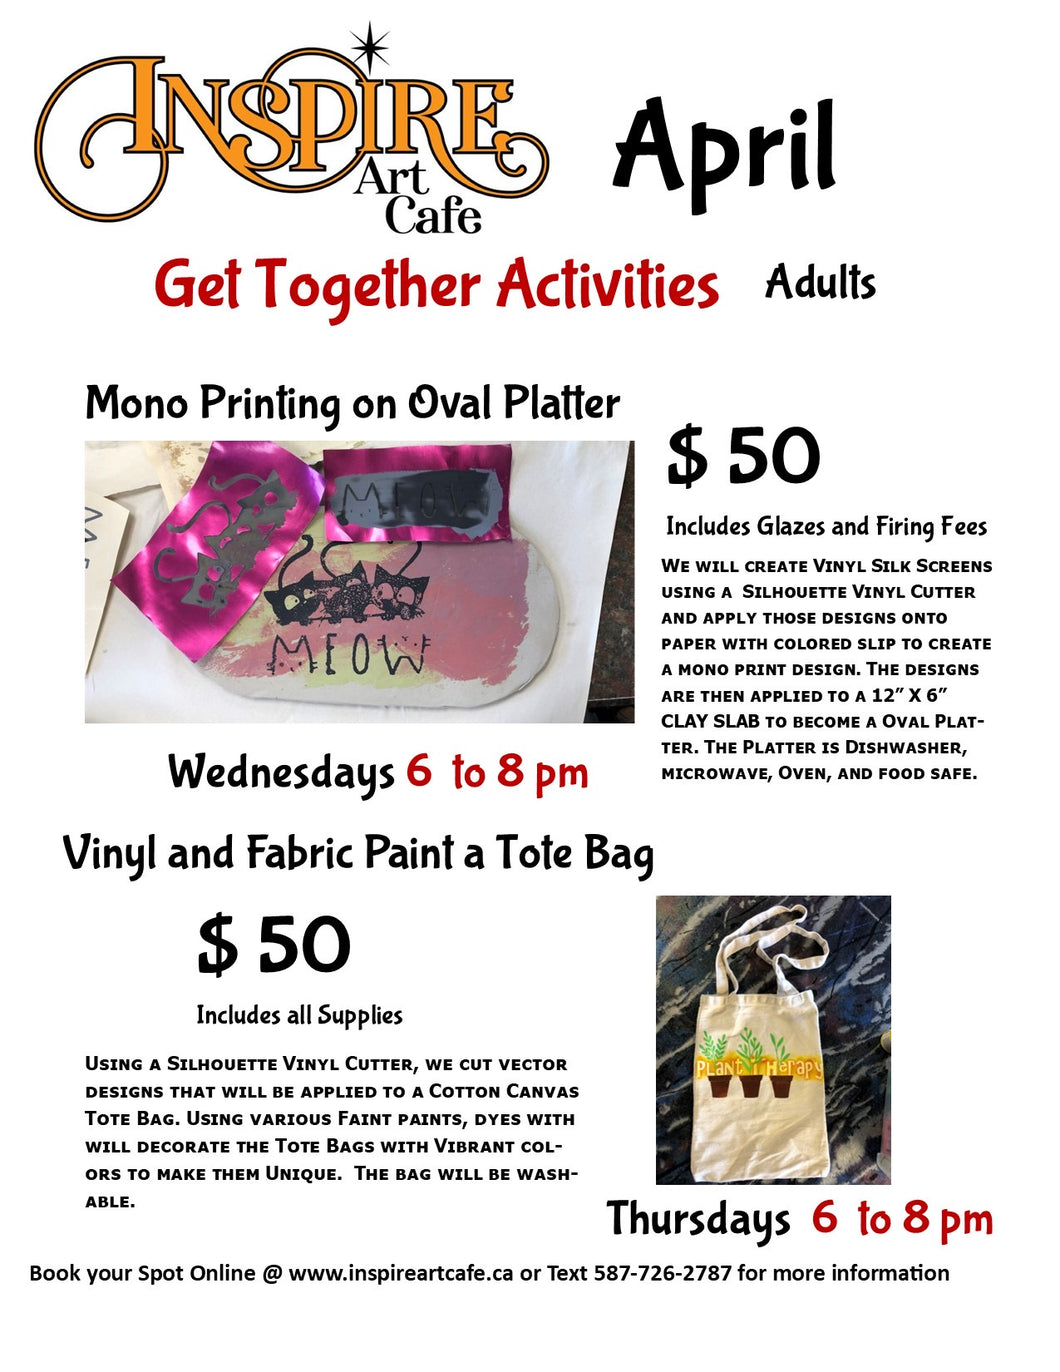 Get Together Activities Mono Printing on Oval Platter April 17